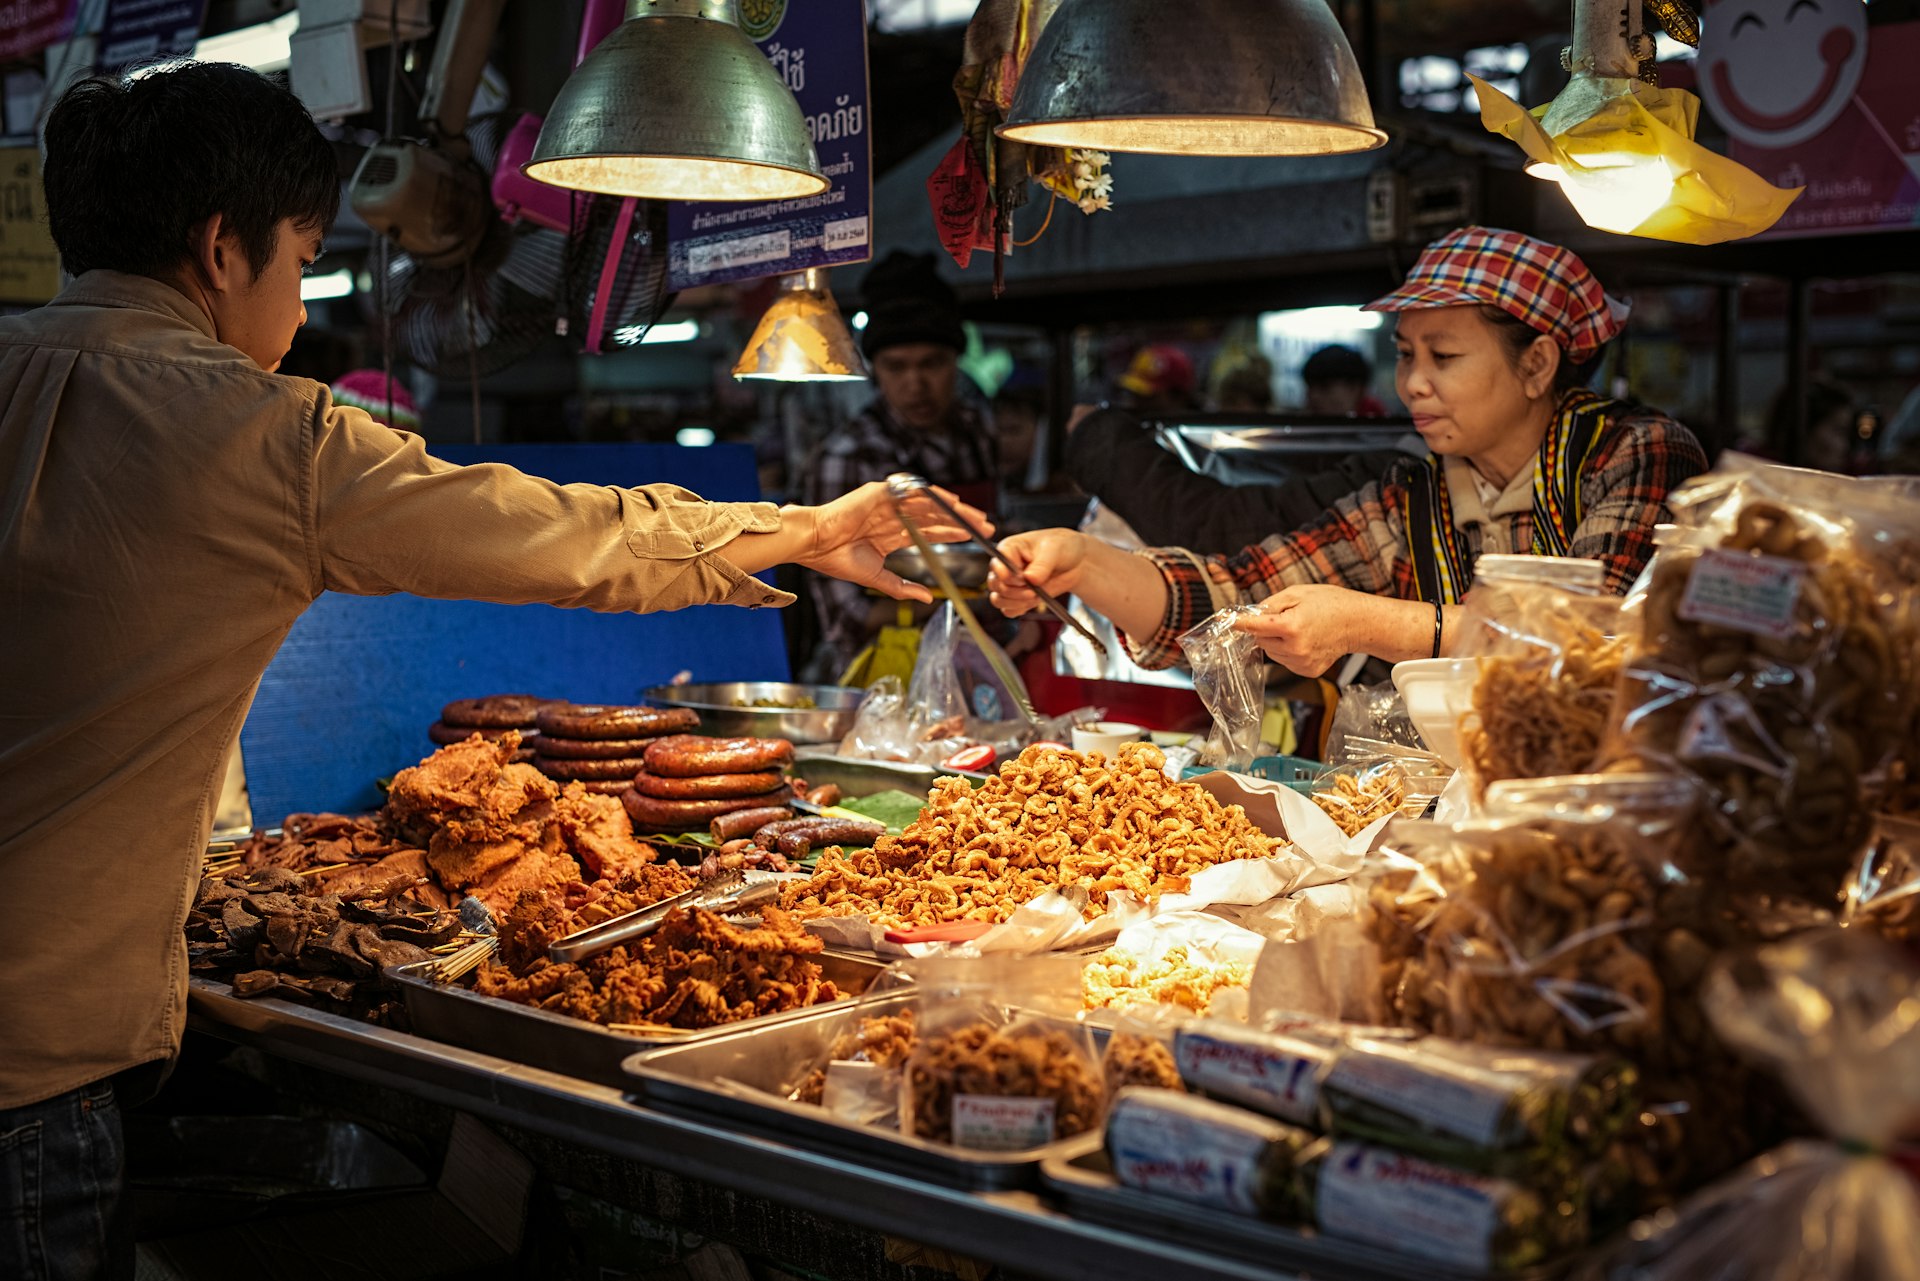 A woman running a food stall hands tongs to a customer so he can select his items